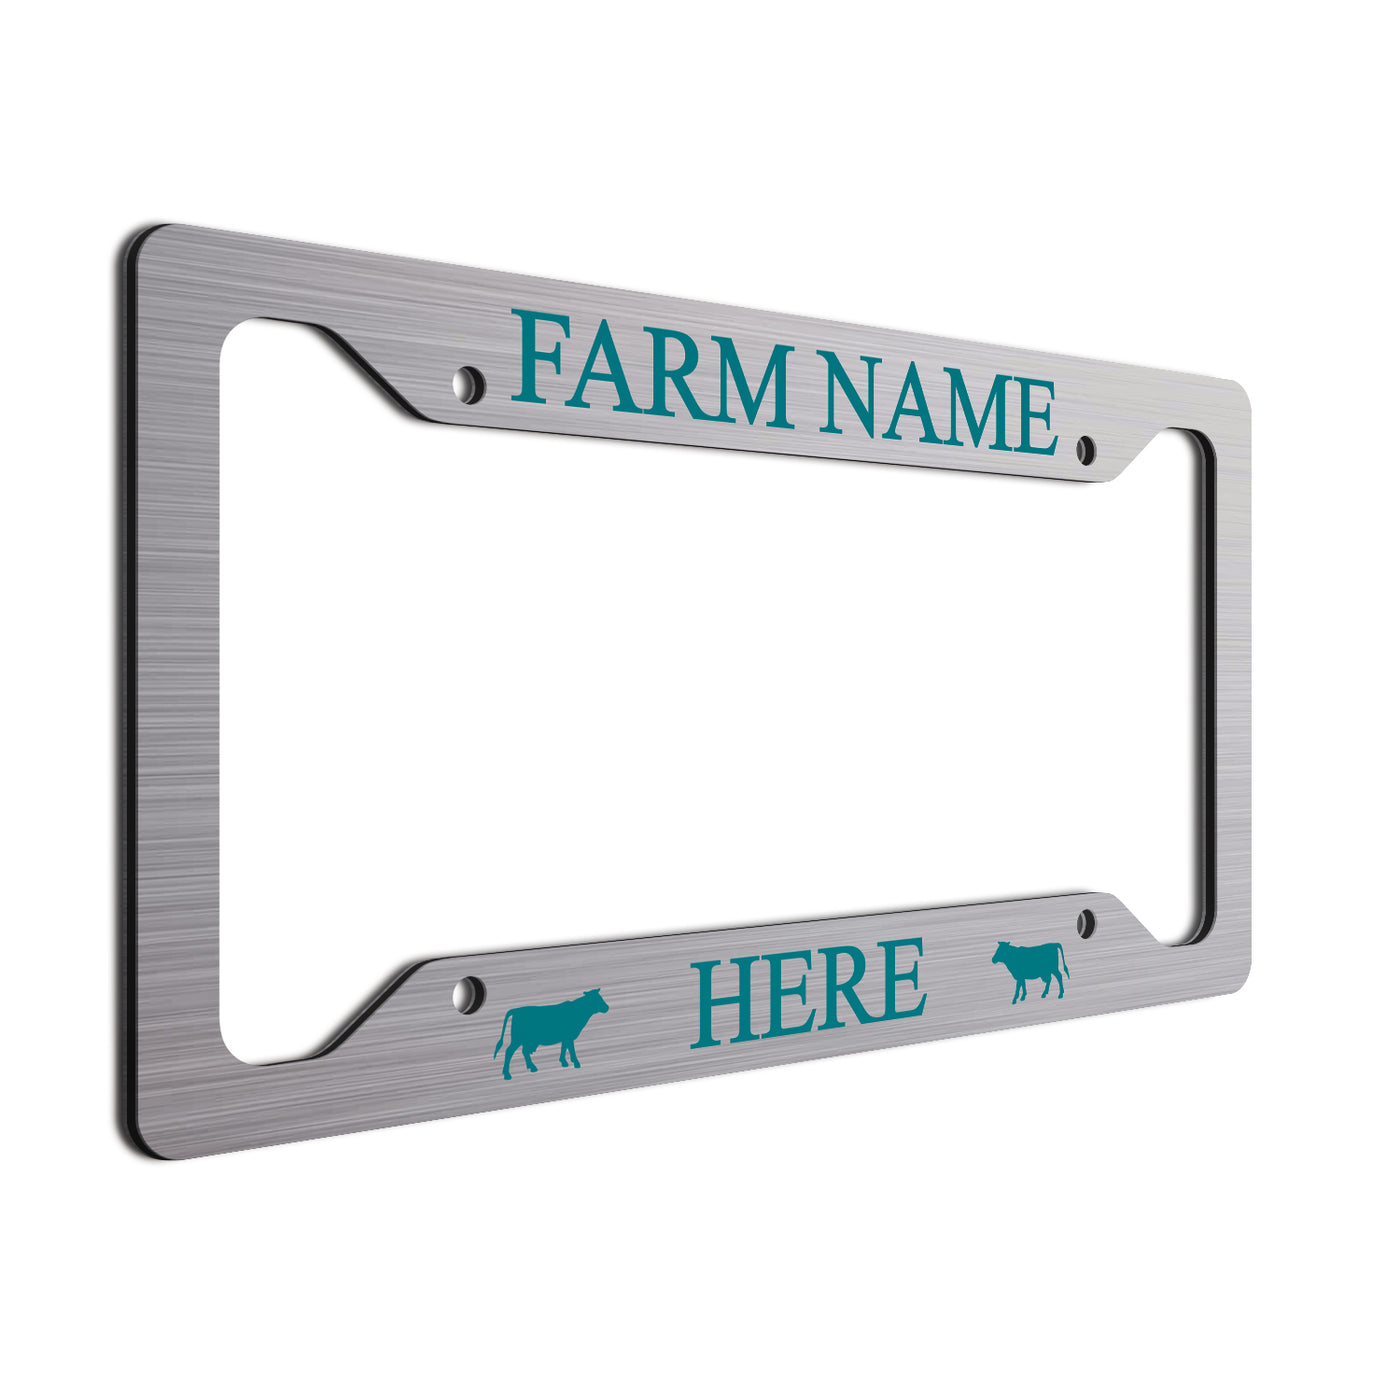 Teal Cows and font on brushed finish